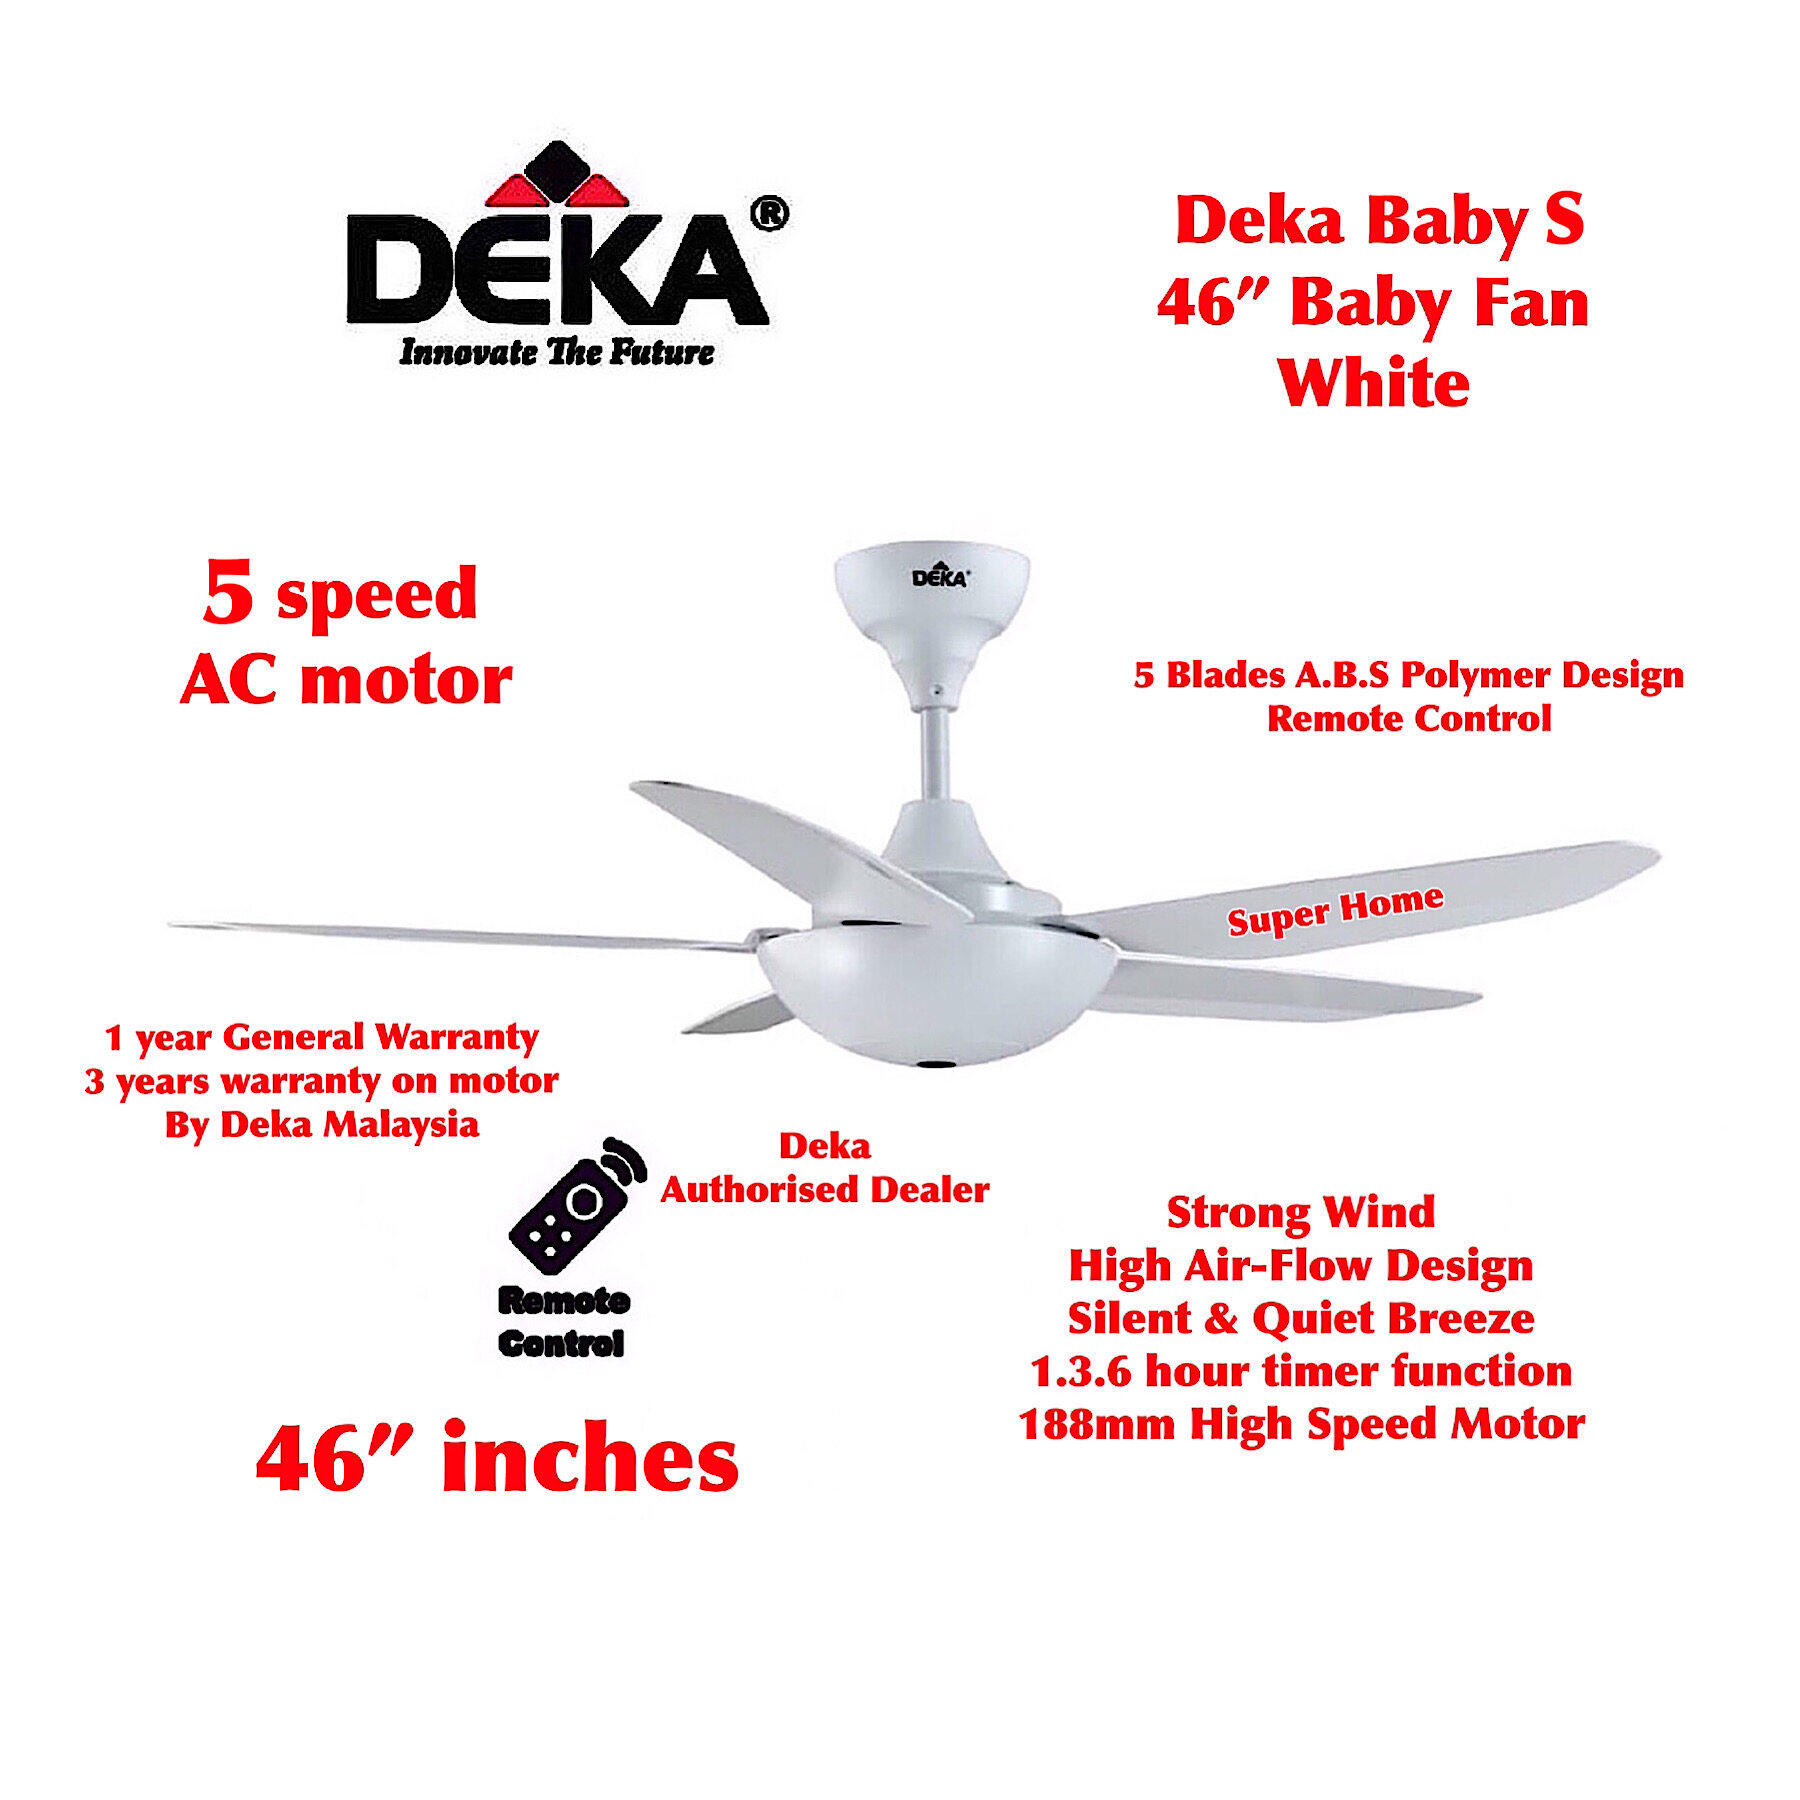 Deka Baby Fan Remote Control 46 inches 5 Blades Baby Ceiling Fan - Baby S - White